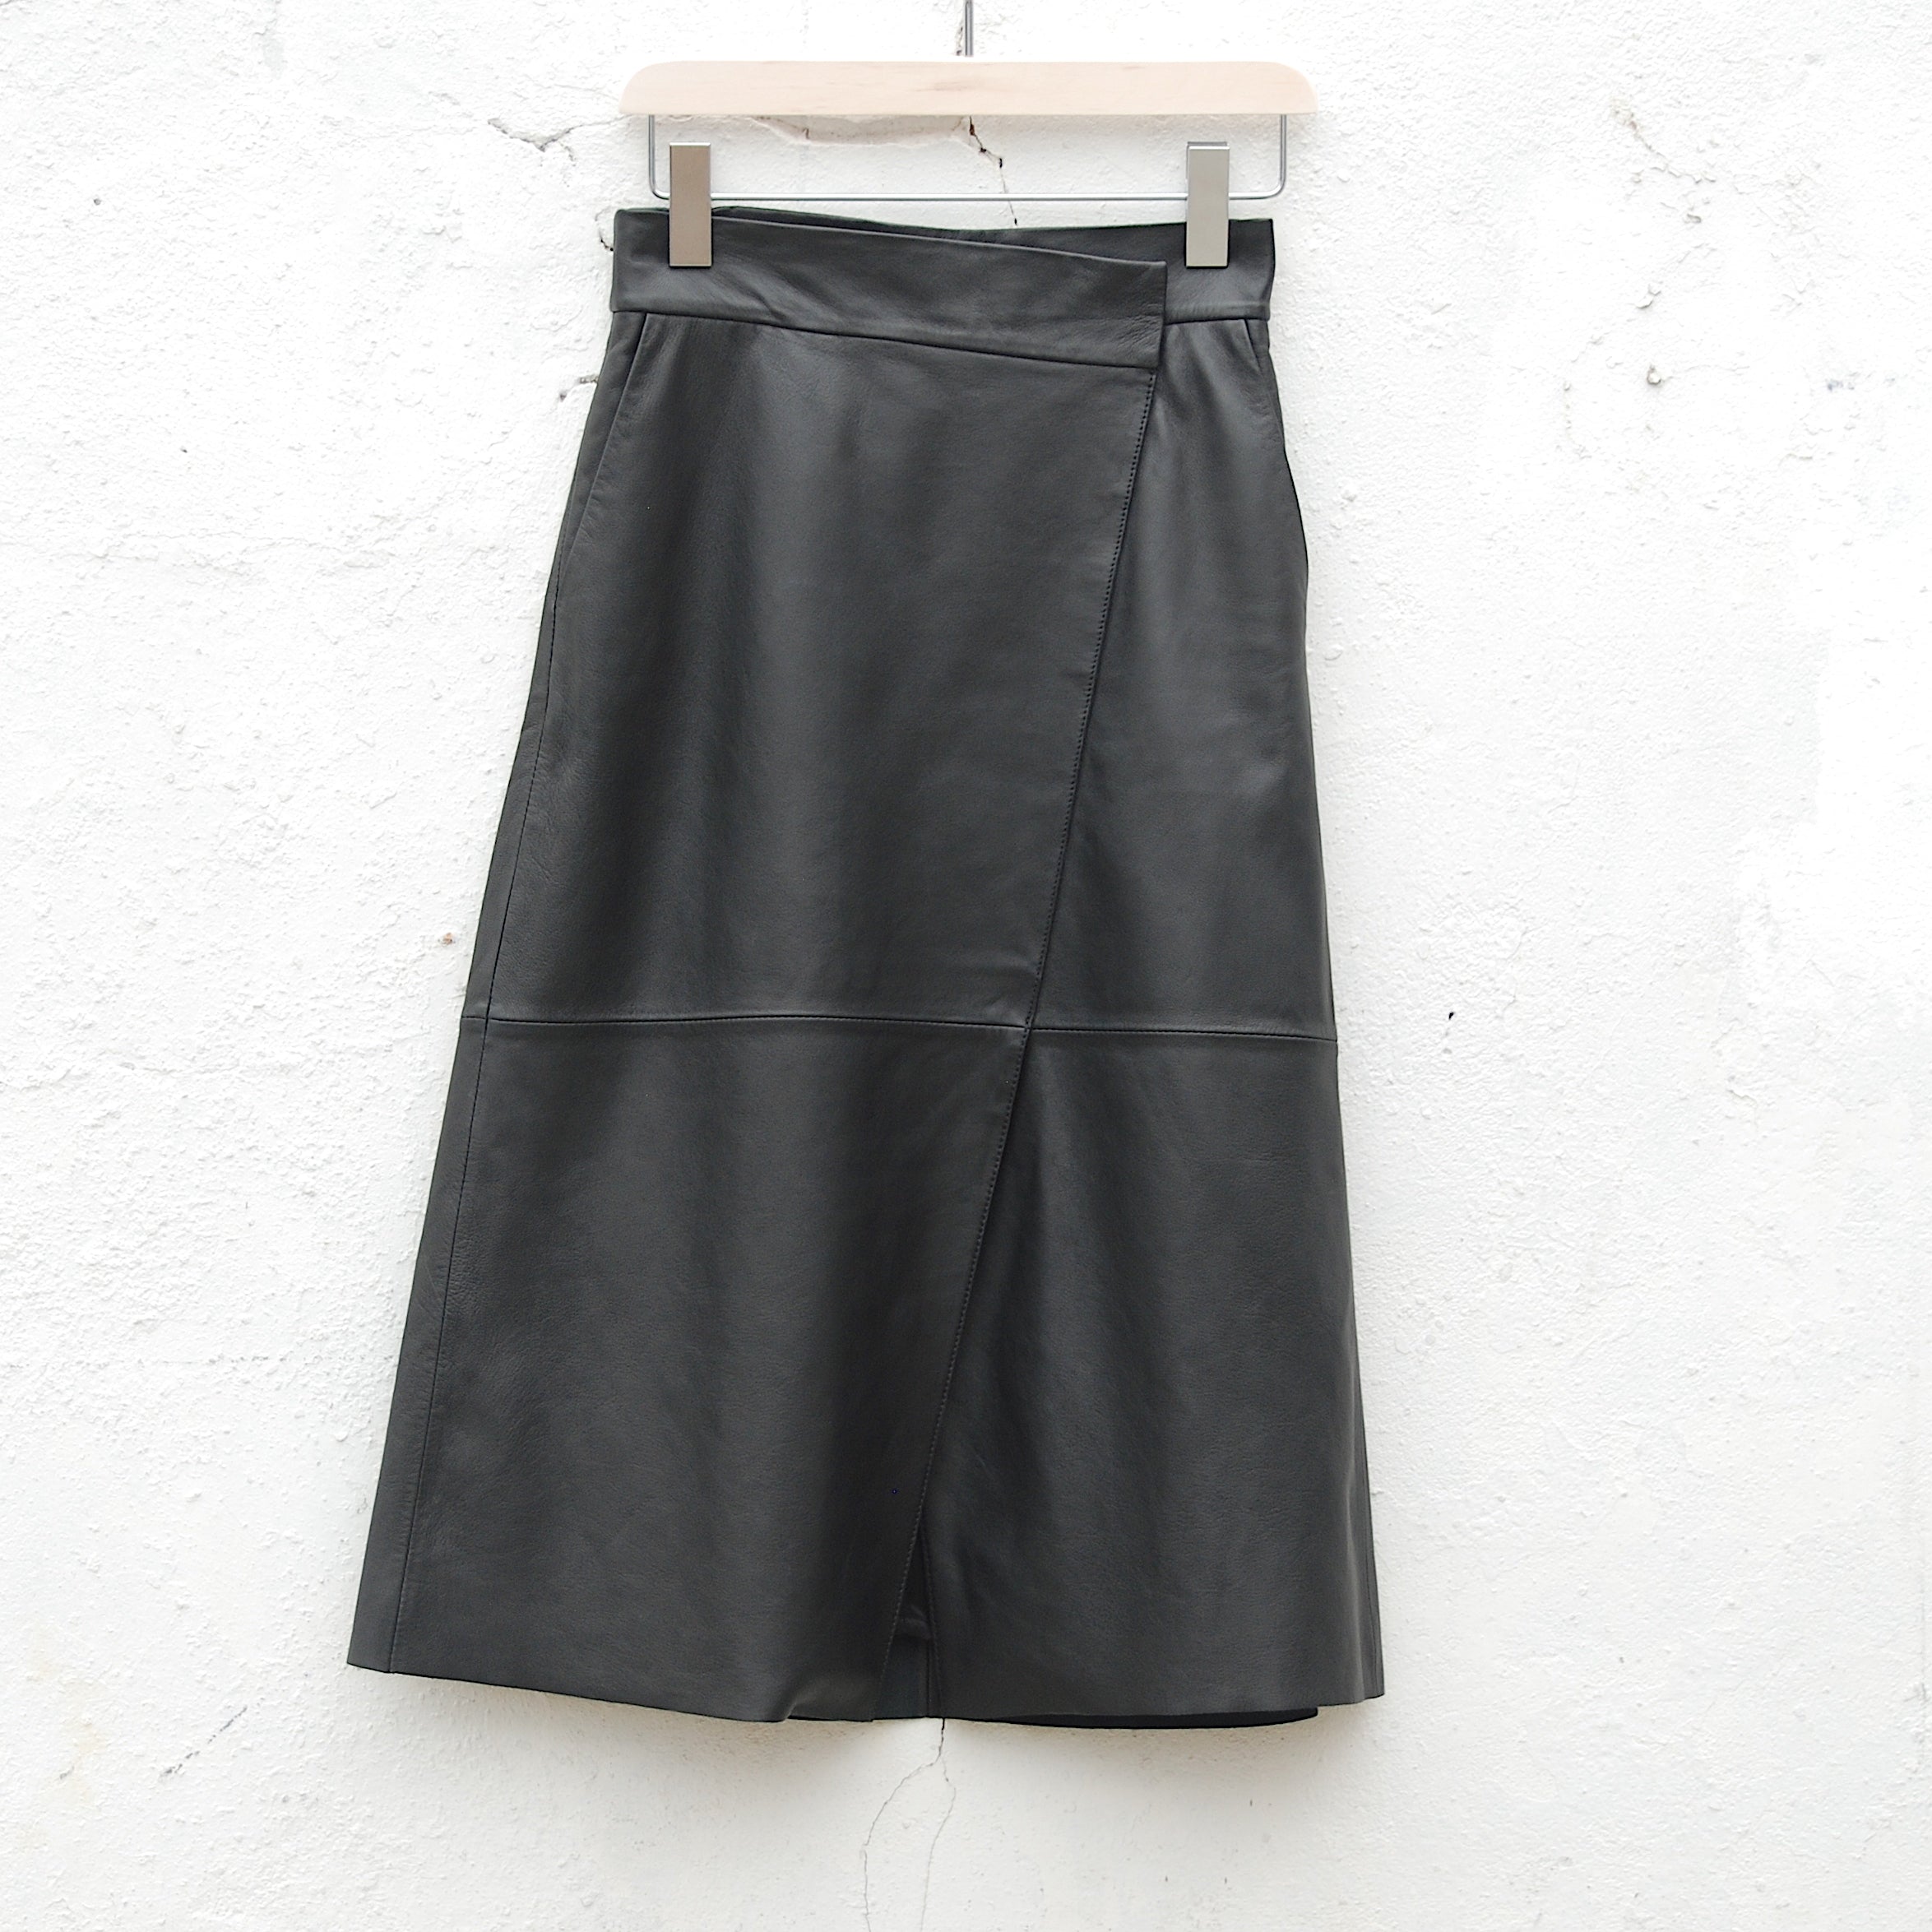 The "How sweet it is" wrap midi skirt